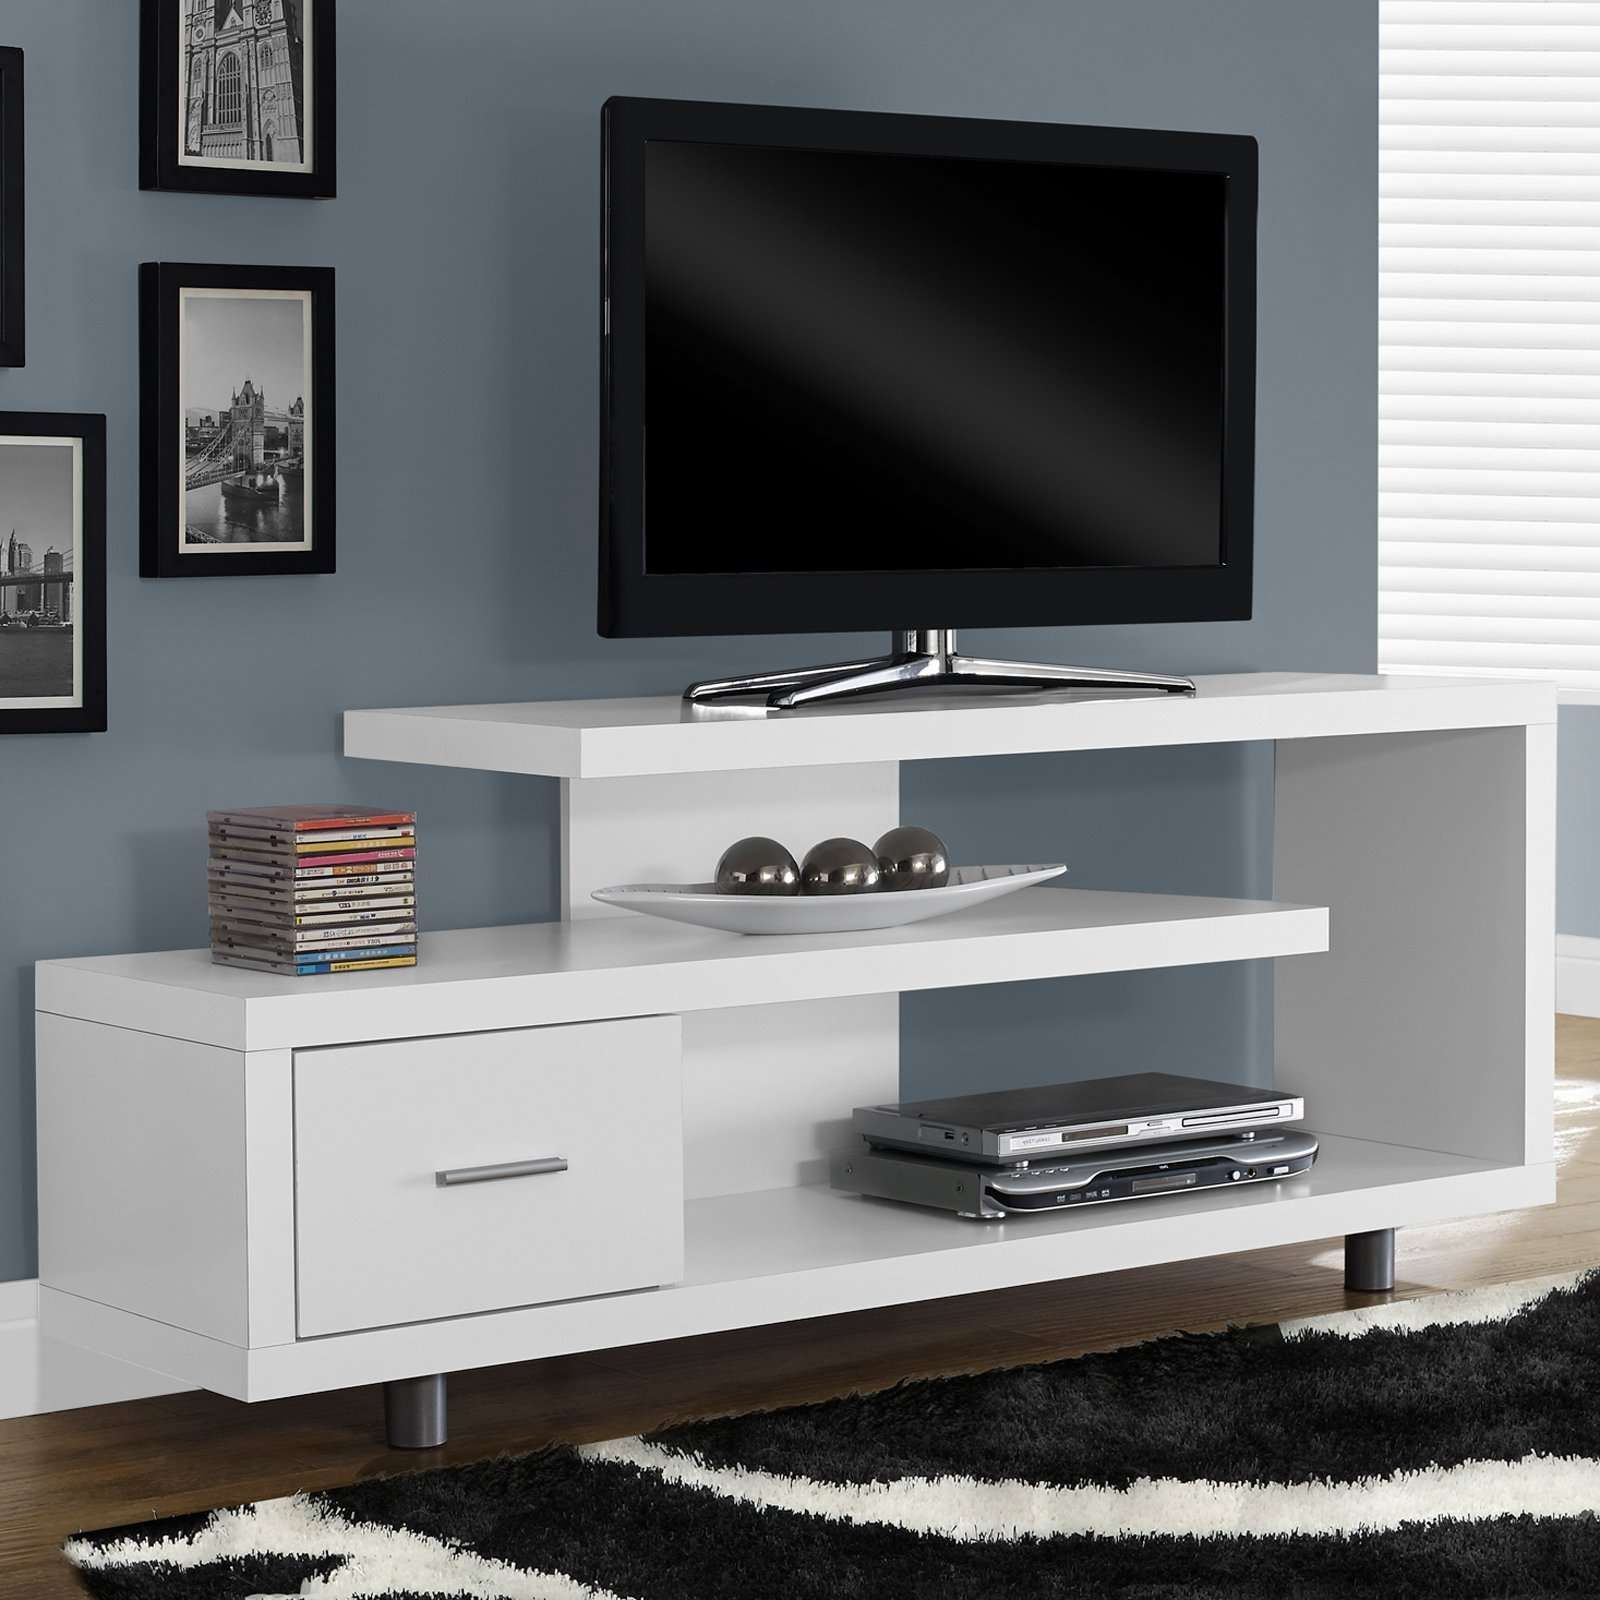 Tvilum Match Tv Stand With Adjustable Shelves – White | Hayneedle For Fancy Tv Cabinets (View 3 of 20)